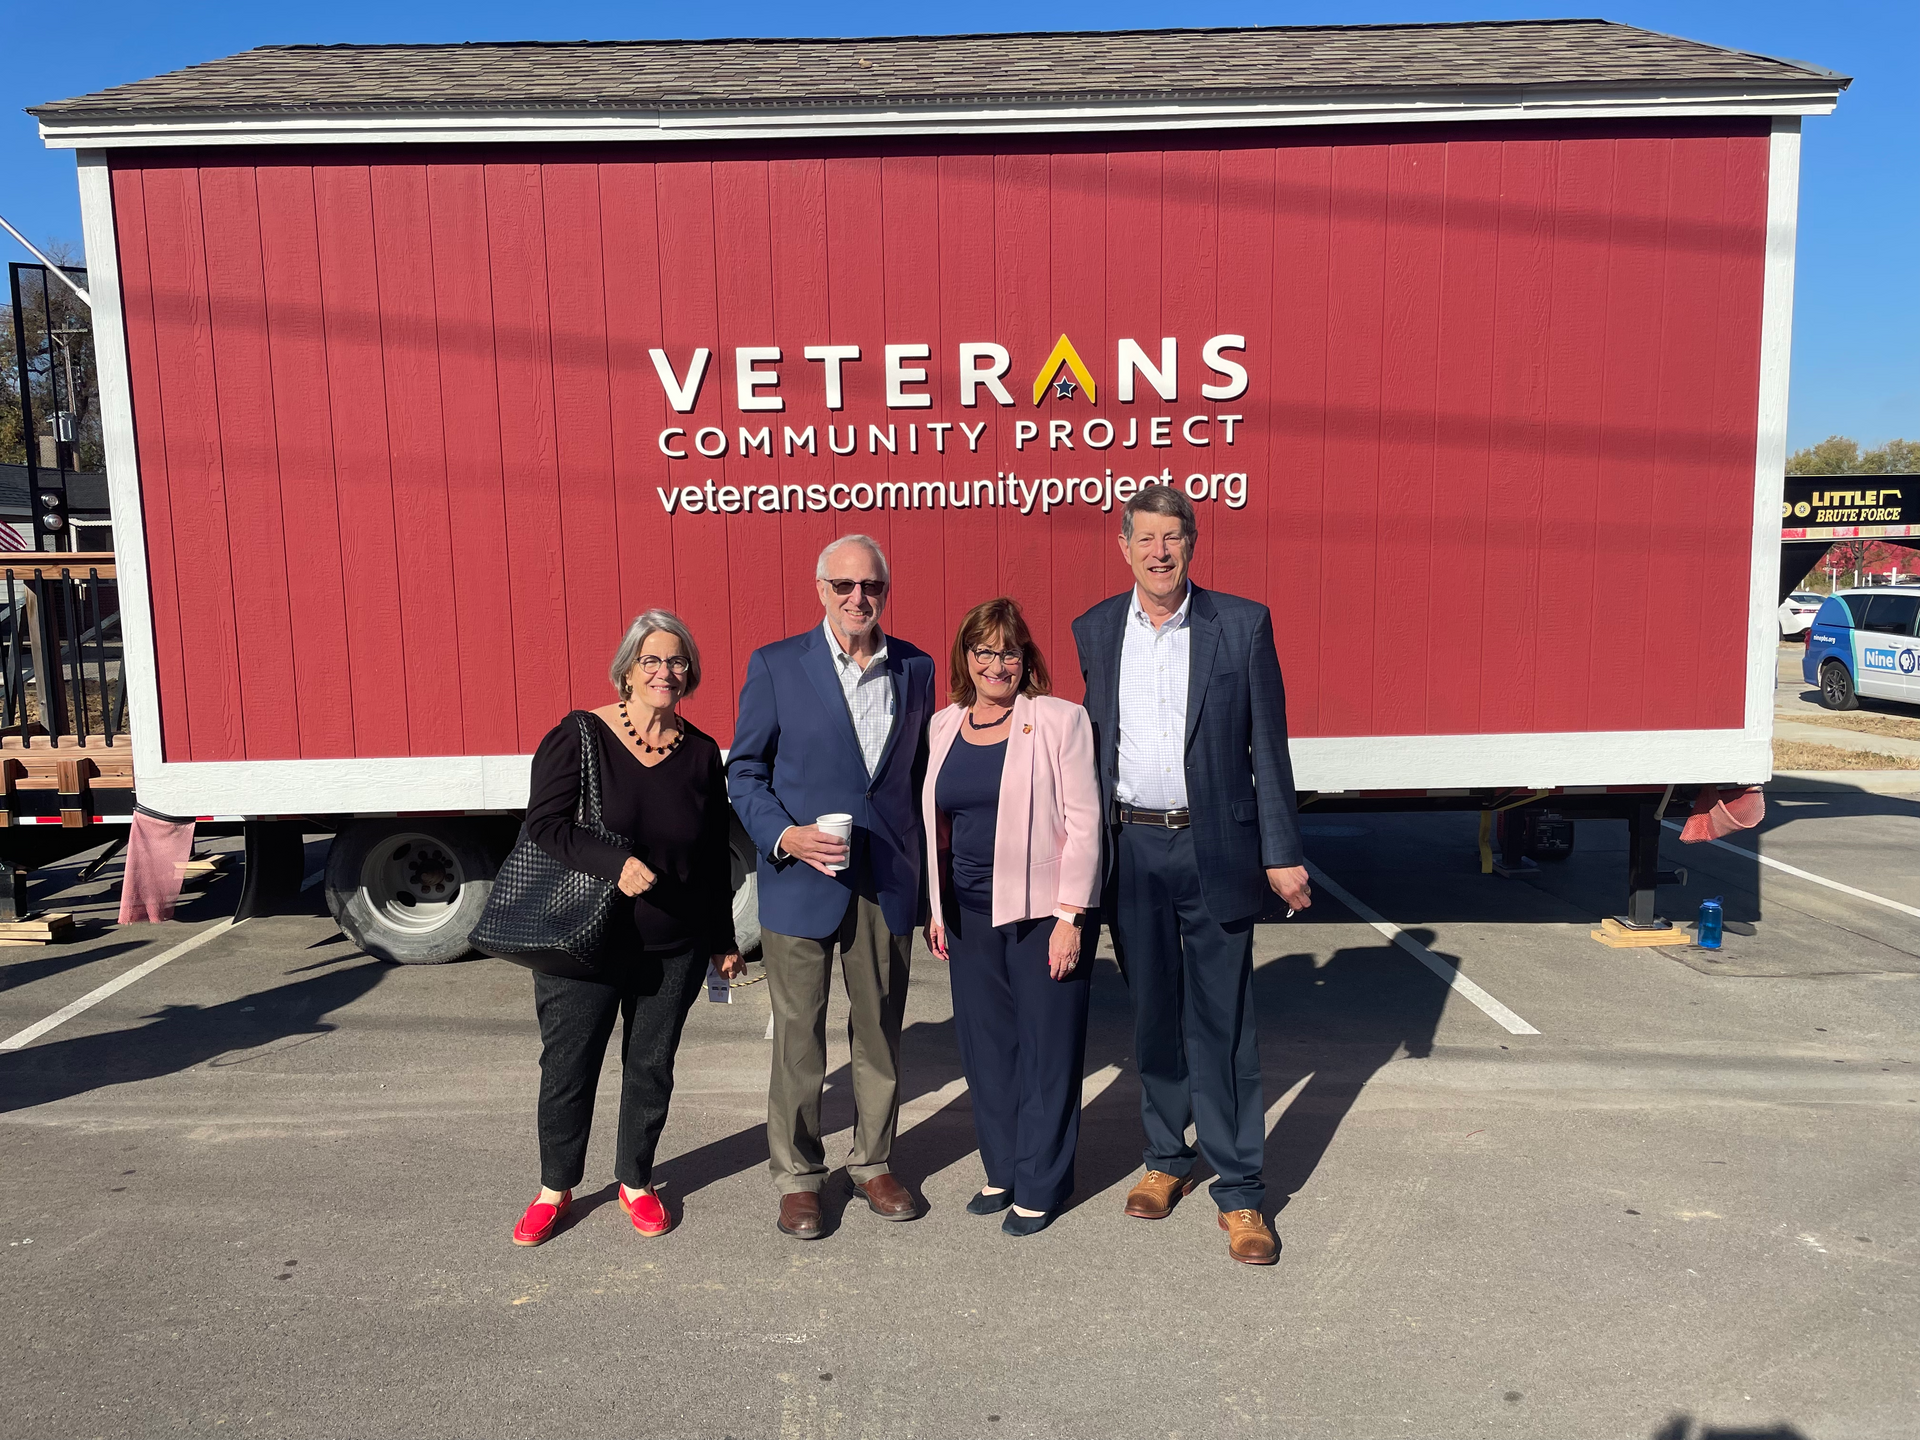 Joe Pereles and company are standing in front of a red trailer that says veterans community project.